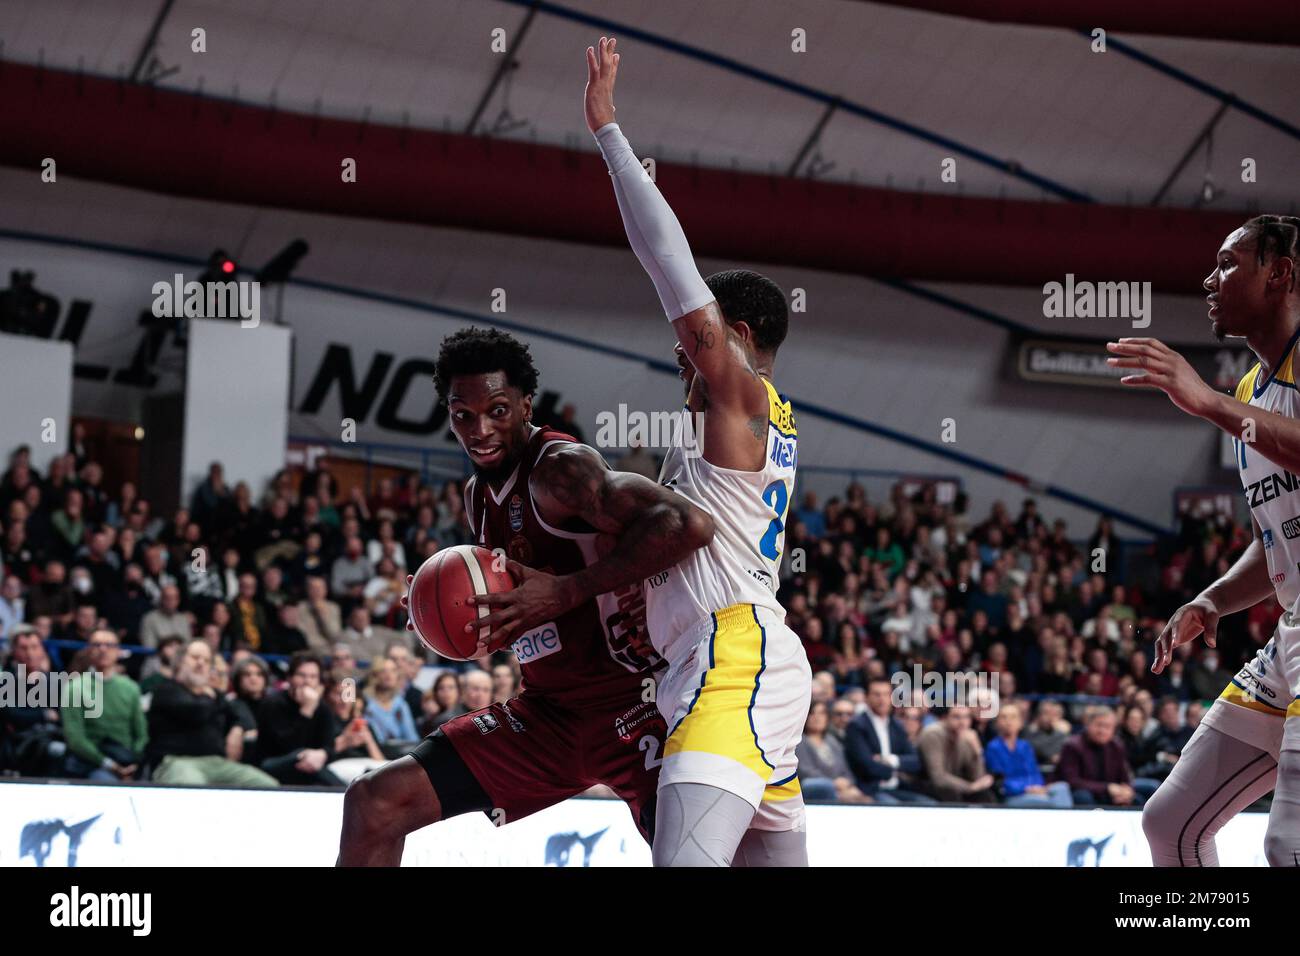 Venice, Italy. 08th Jan, 2023. Jordan Parks (Umana Reyer Venezia) and Karvel Anderson (Tezenis Verona) during Umana Reyer Venezia vs Tezenis Verona, Italian Basketball A Serie Championship in Venice, Italy, January 08 2023 Credit: Independent Photo Agency/Alamy Live News Stock Photo